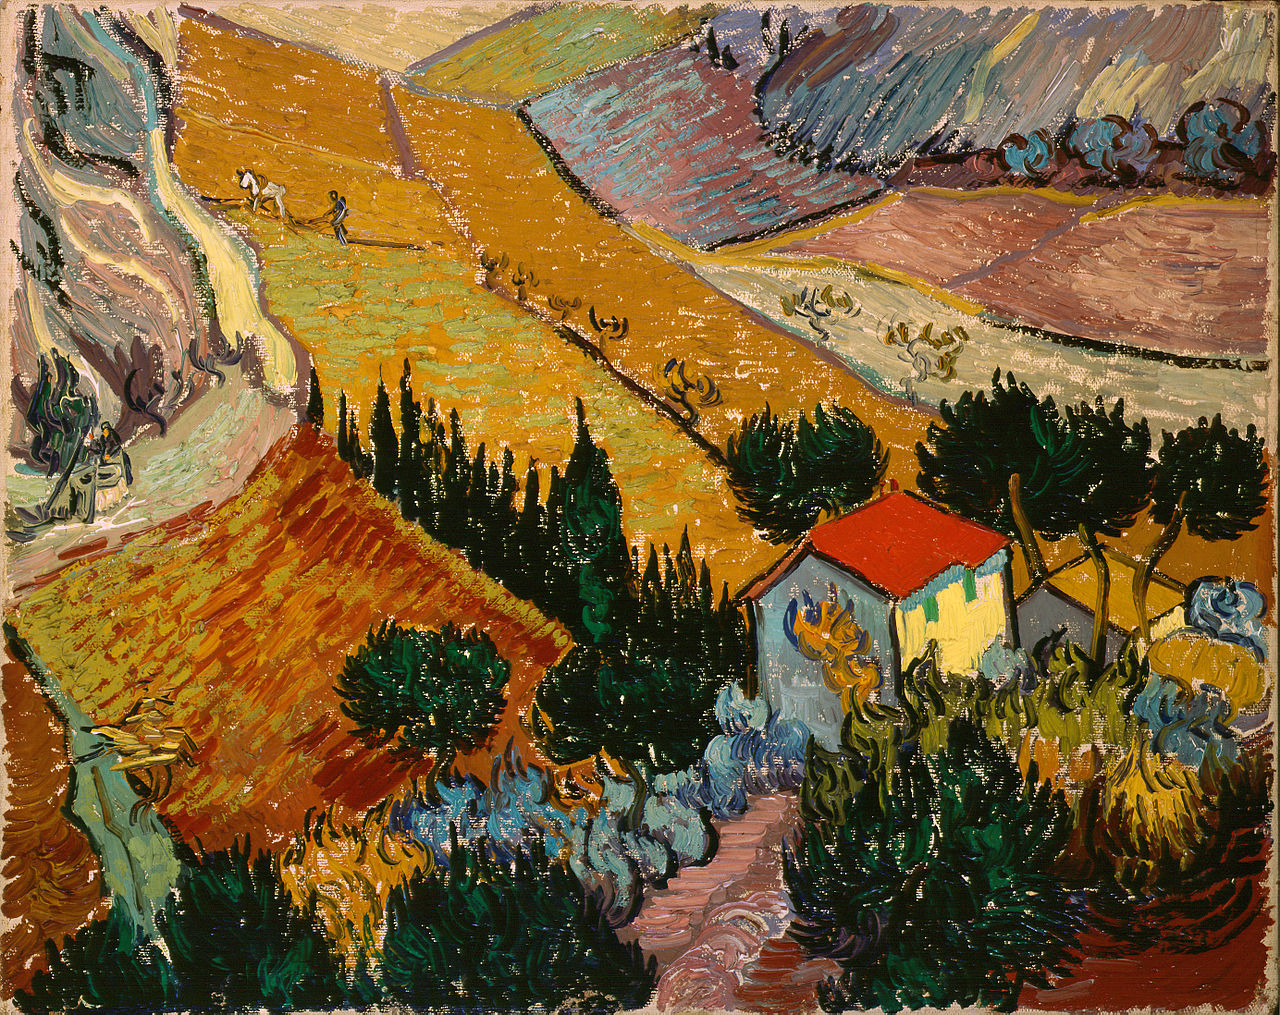 Landscape with House and Ploughman by Vincent van Gogh - 1889 - 33 x 41.4 cm Hermitage Museum